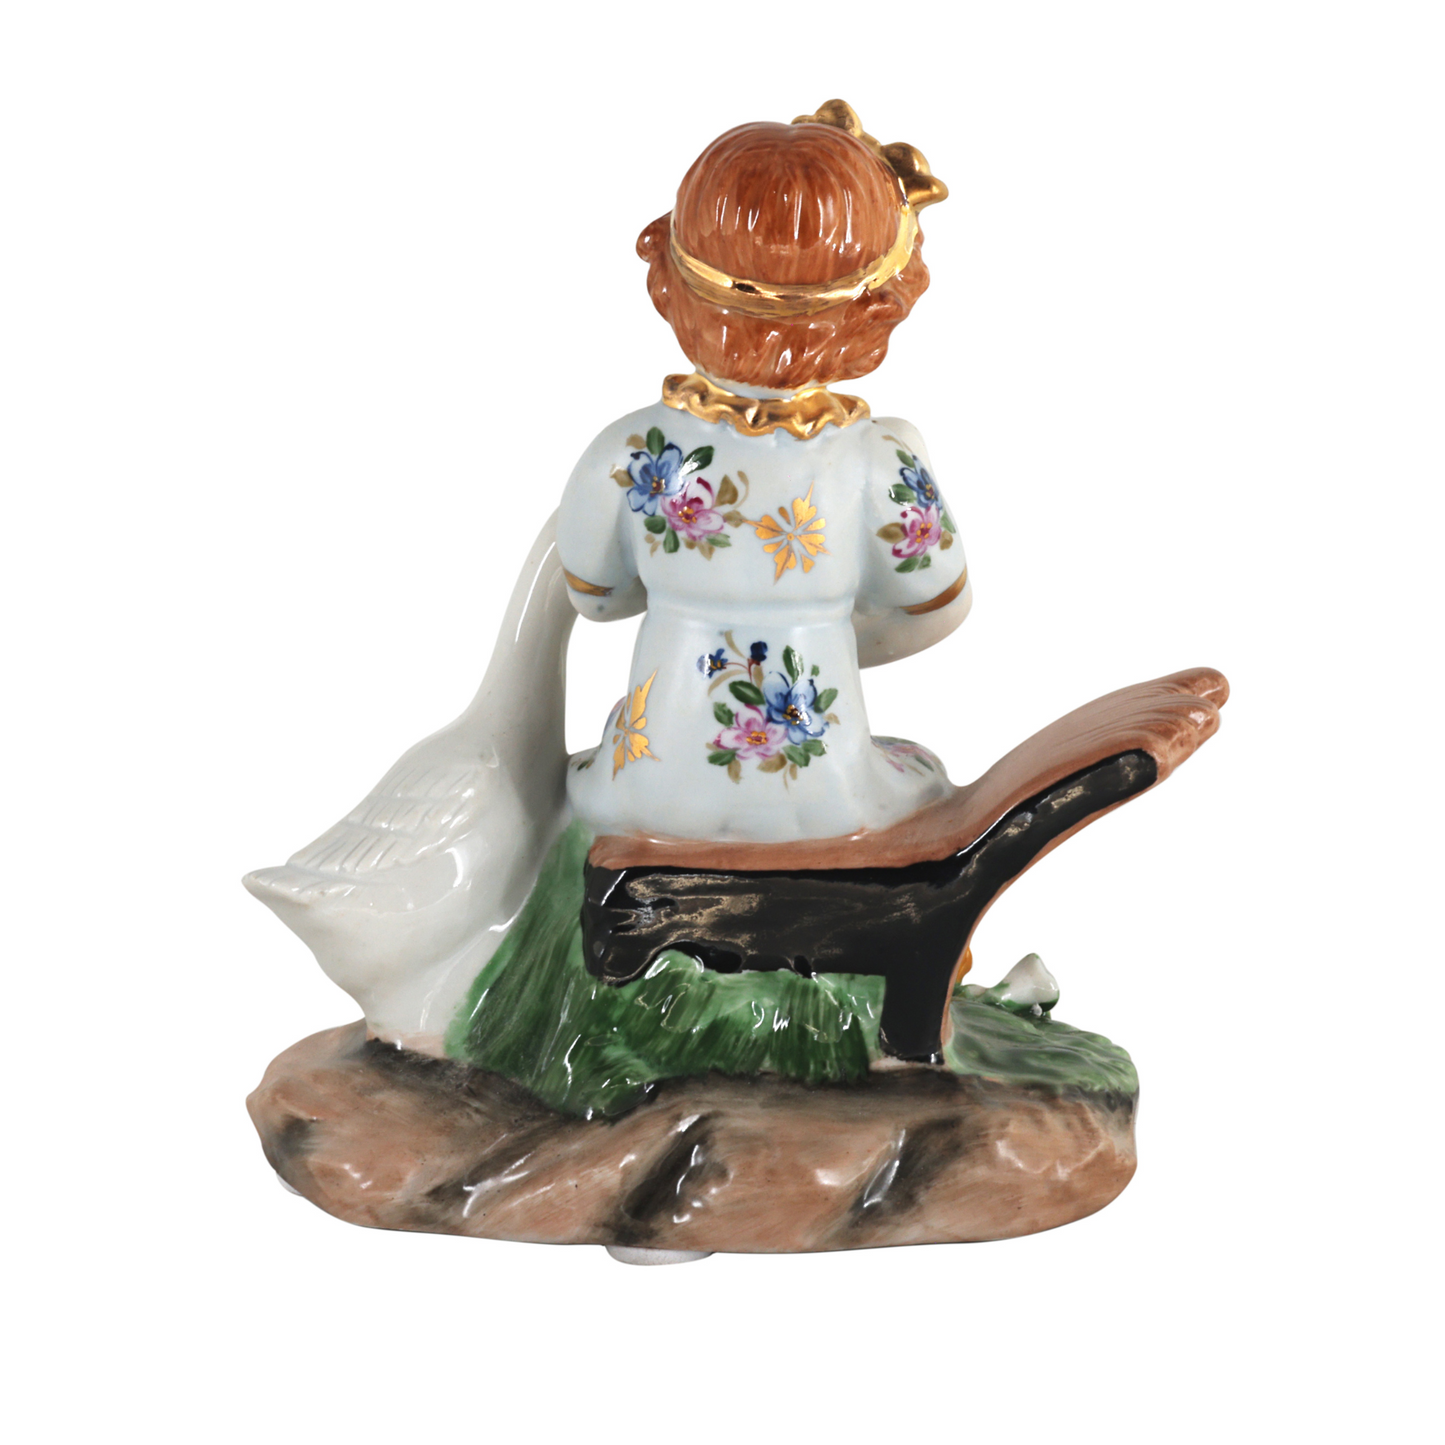 Hand-painted Porcelain Rococo Style Figurine